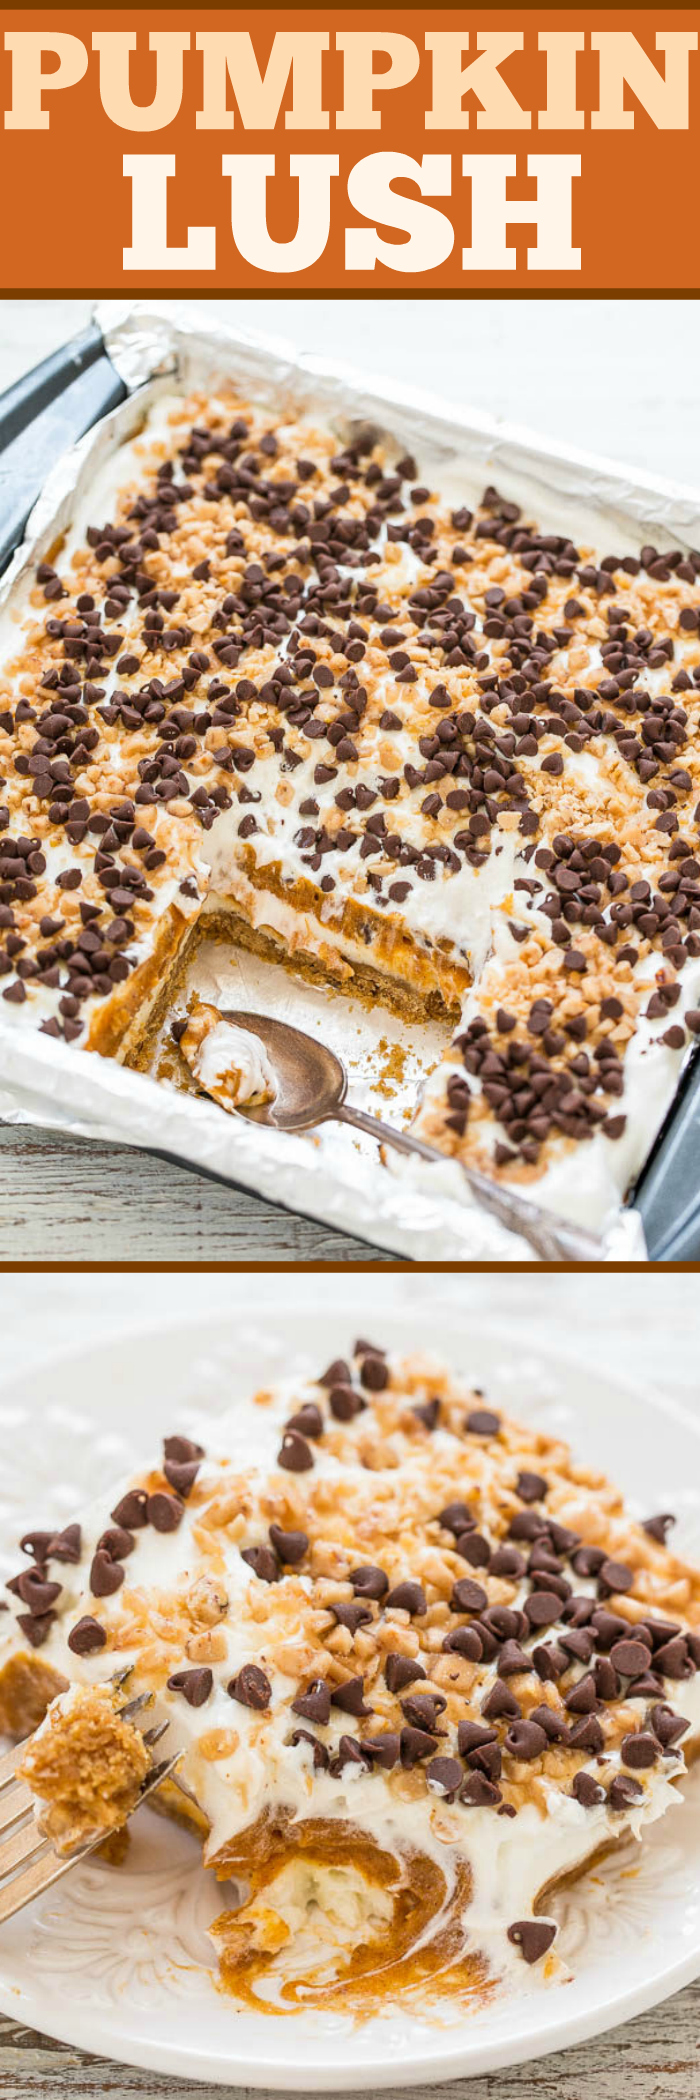 Pumpkin Lush - EASY layered dessert with a graham cracker crust, cream cheese, pudding, PUMPKIN, whipped topping, chocolate chips, and toffee bits!! A little bit of CRUNCH with lots of fluffy CREAMINESS!!